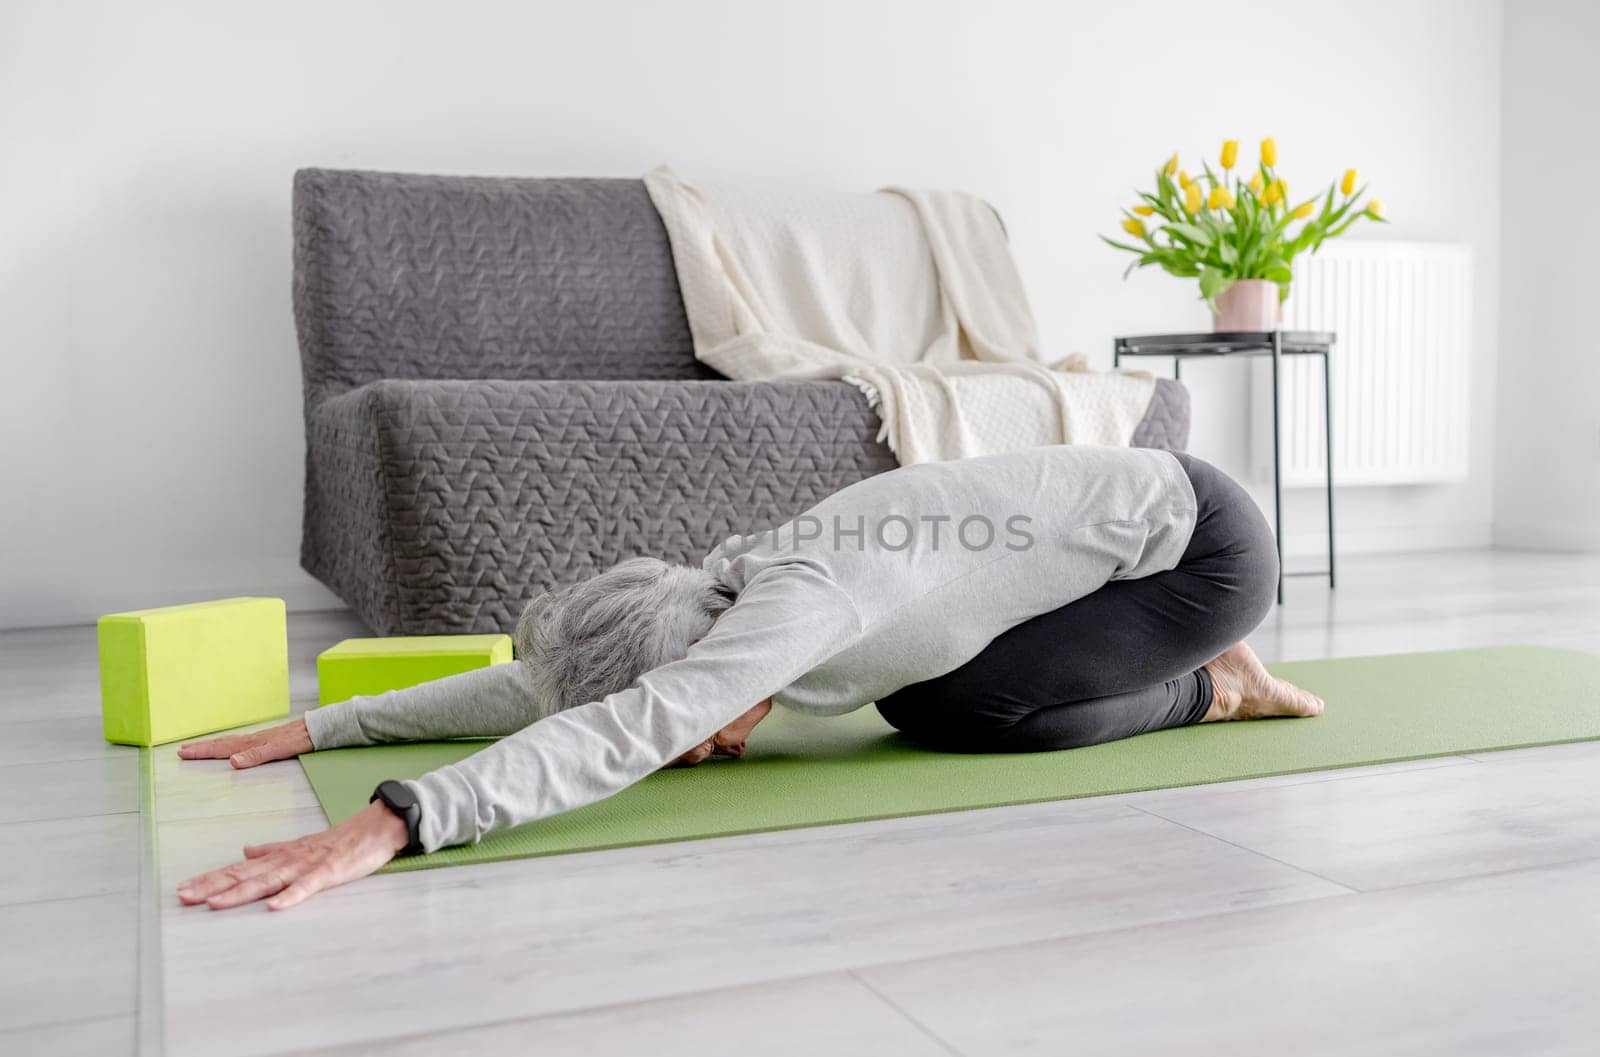 Grey-Haired Woman In baby Pose Practices Yoga At Home On The Floor In A Bright Living Room